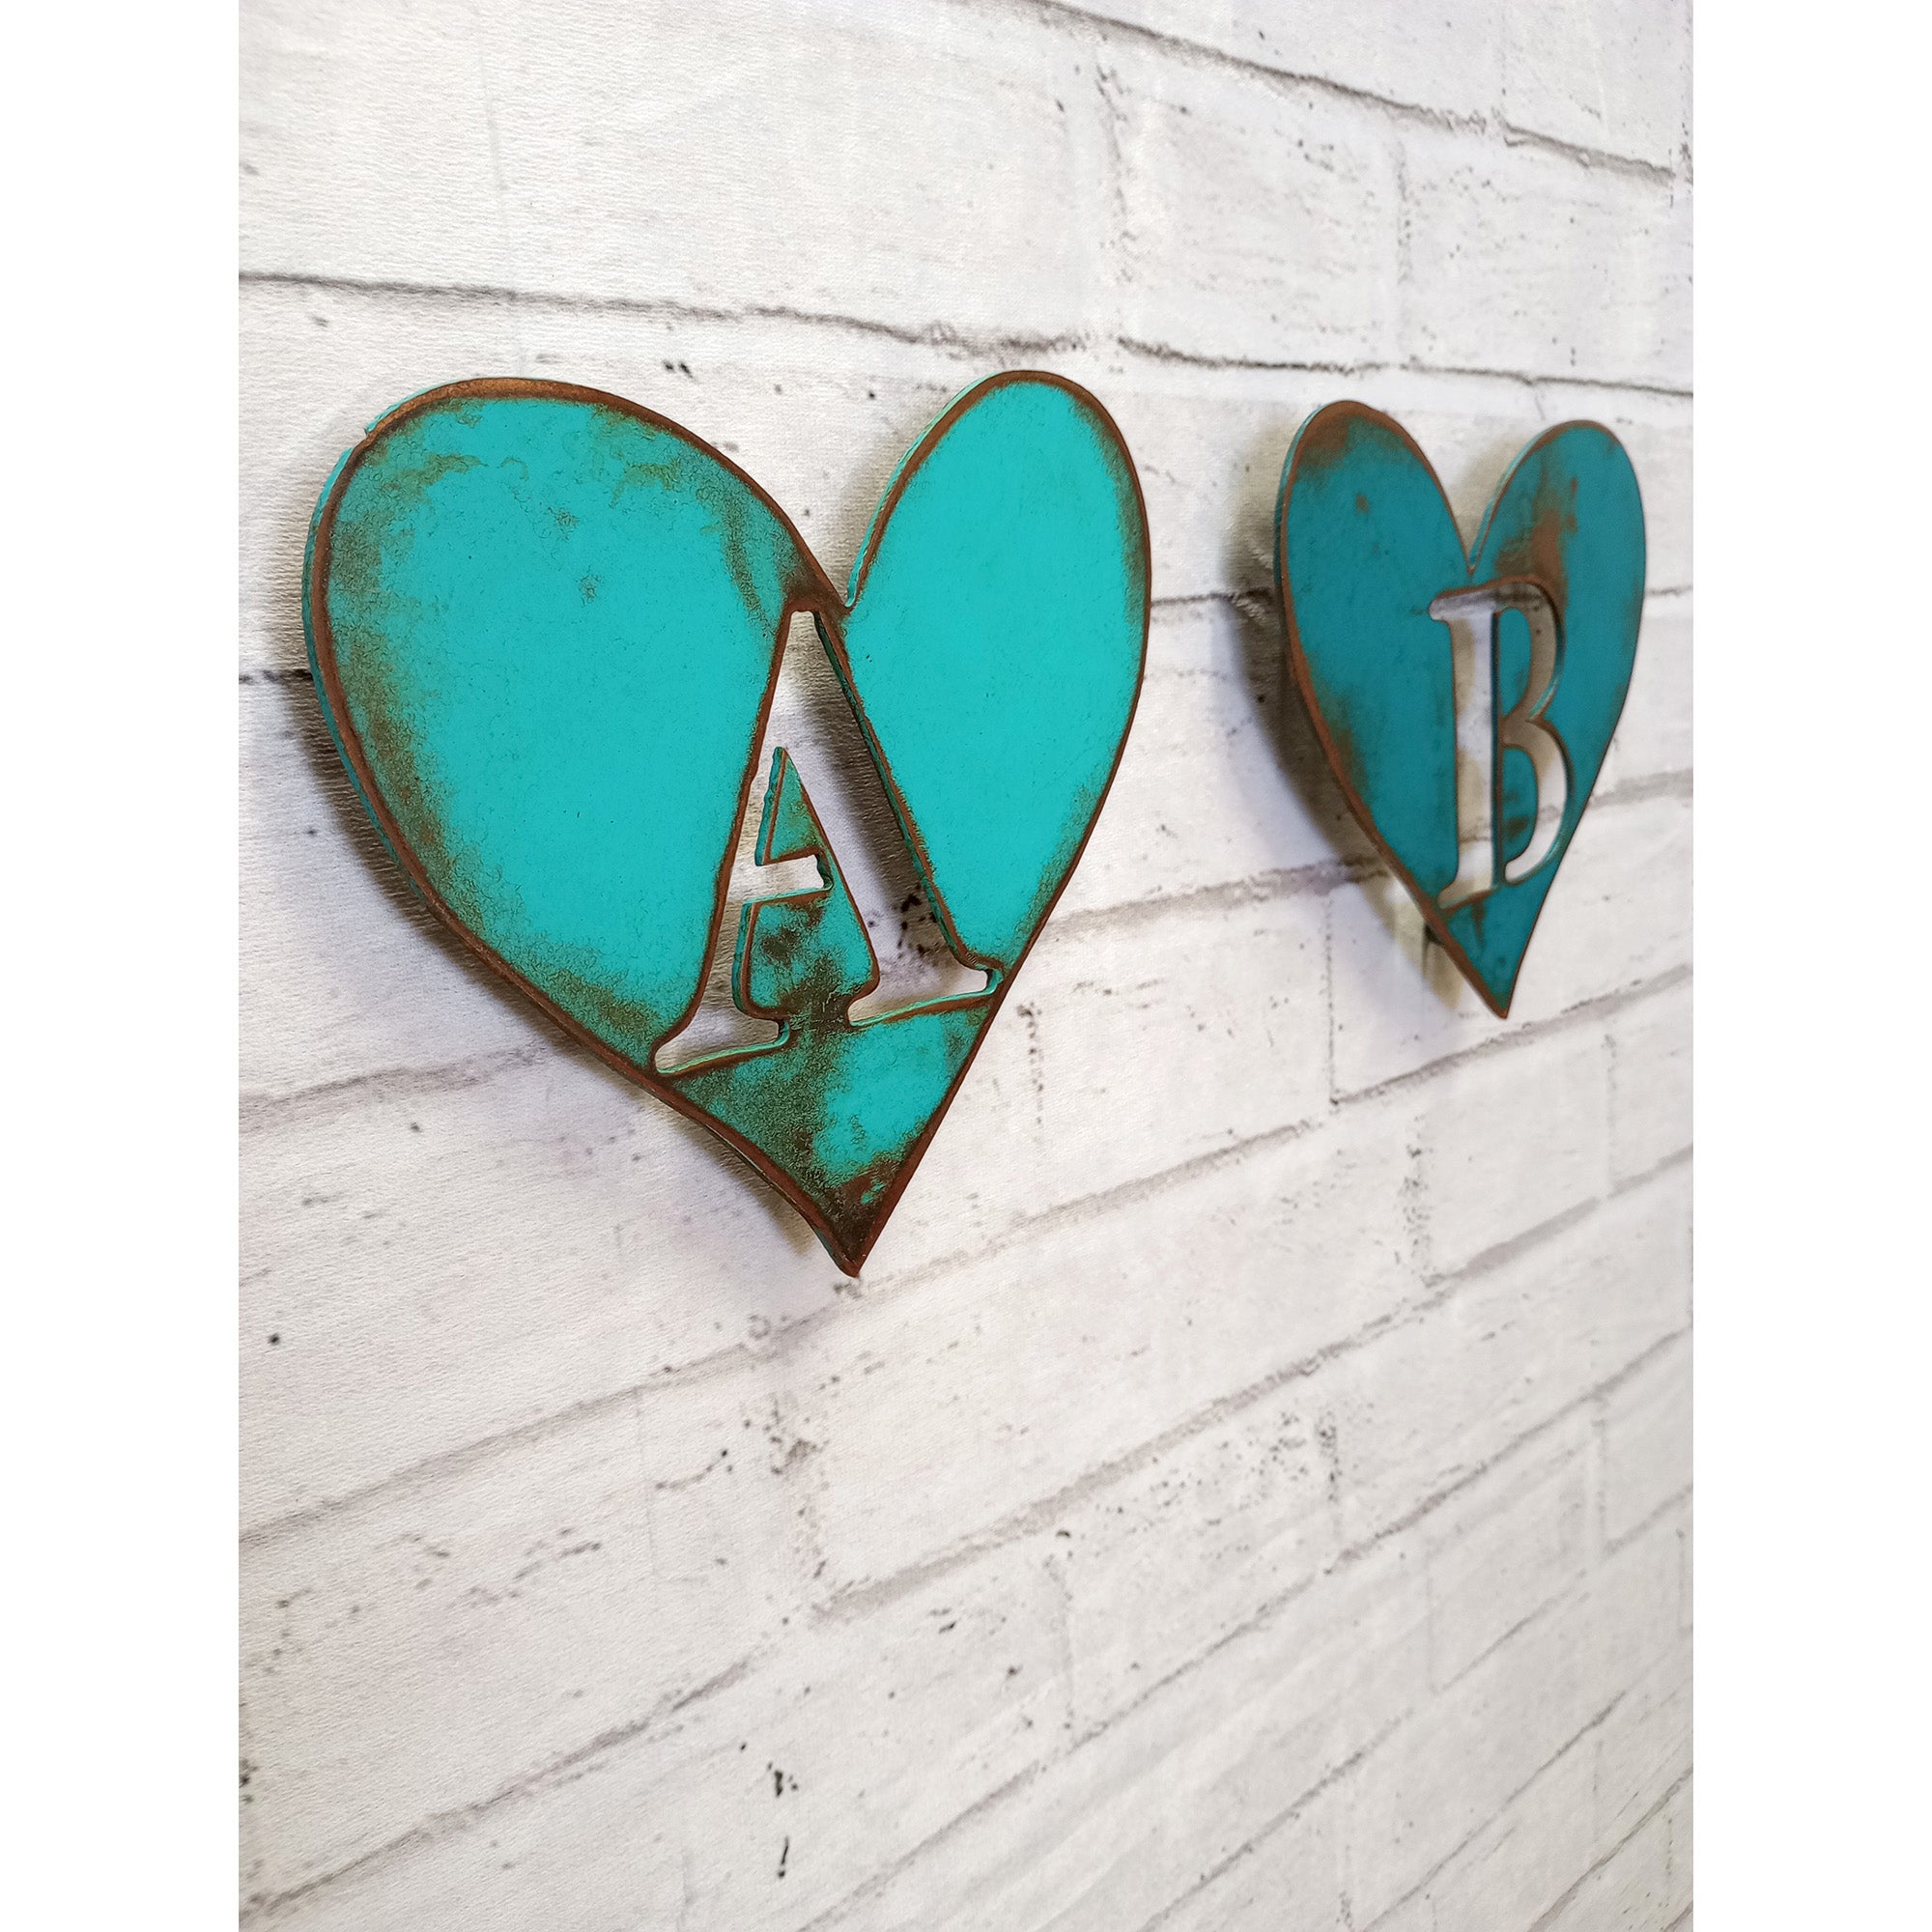 Wood Hearts. Teal and Turquoise Hearts. Chunky Wooden Heart Shapes. Rustic  Heart Wall Decor